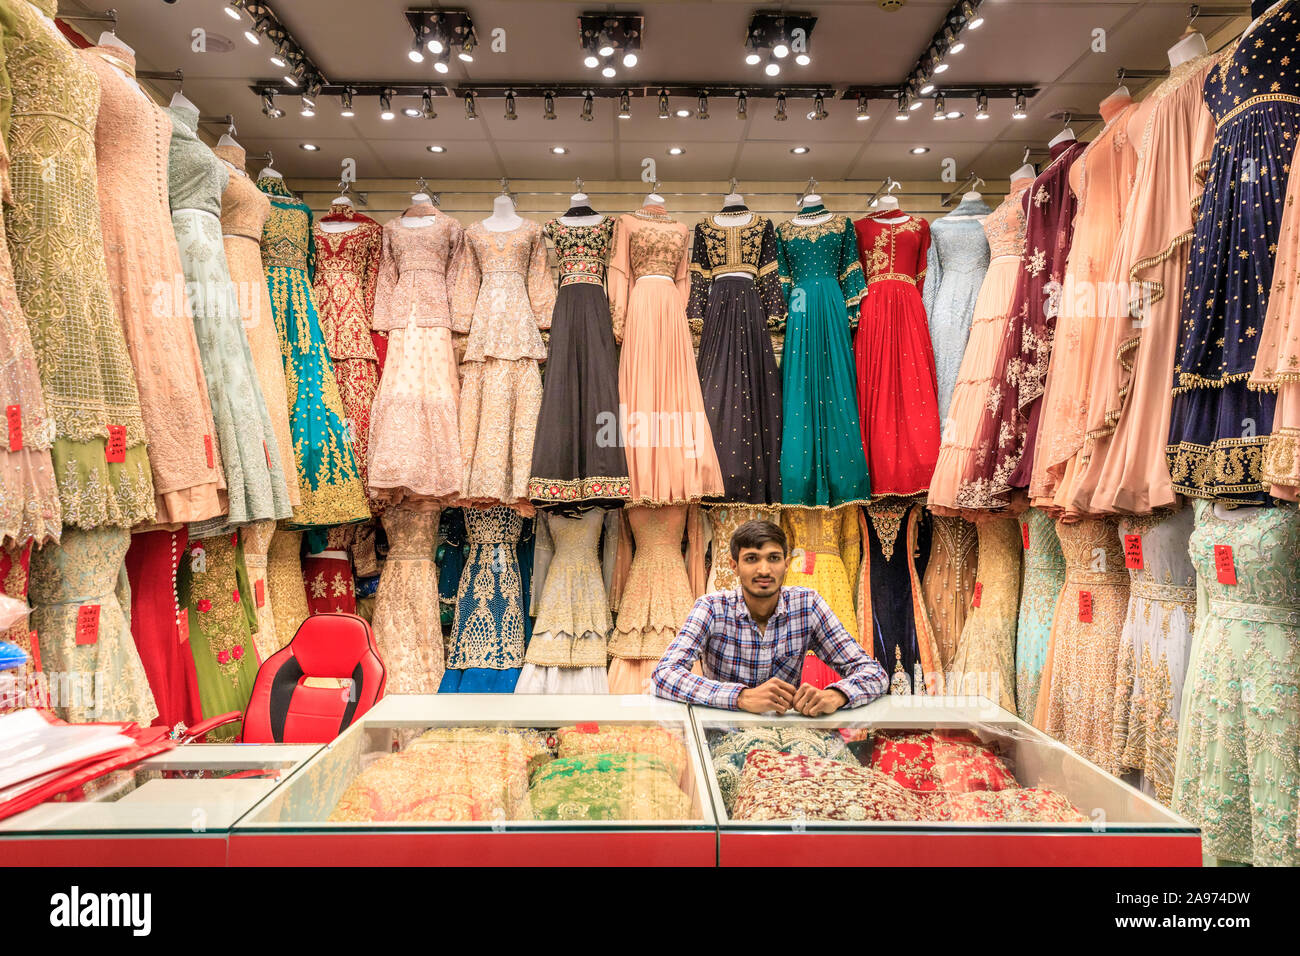 Punjabi, Indian and Asian dresses and saris on display, traditional, colourful evening wear and clothes in a shop in Southall, London, UK Stock Photo